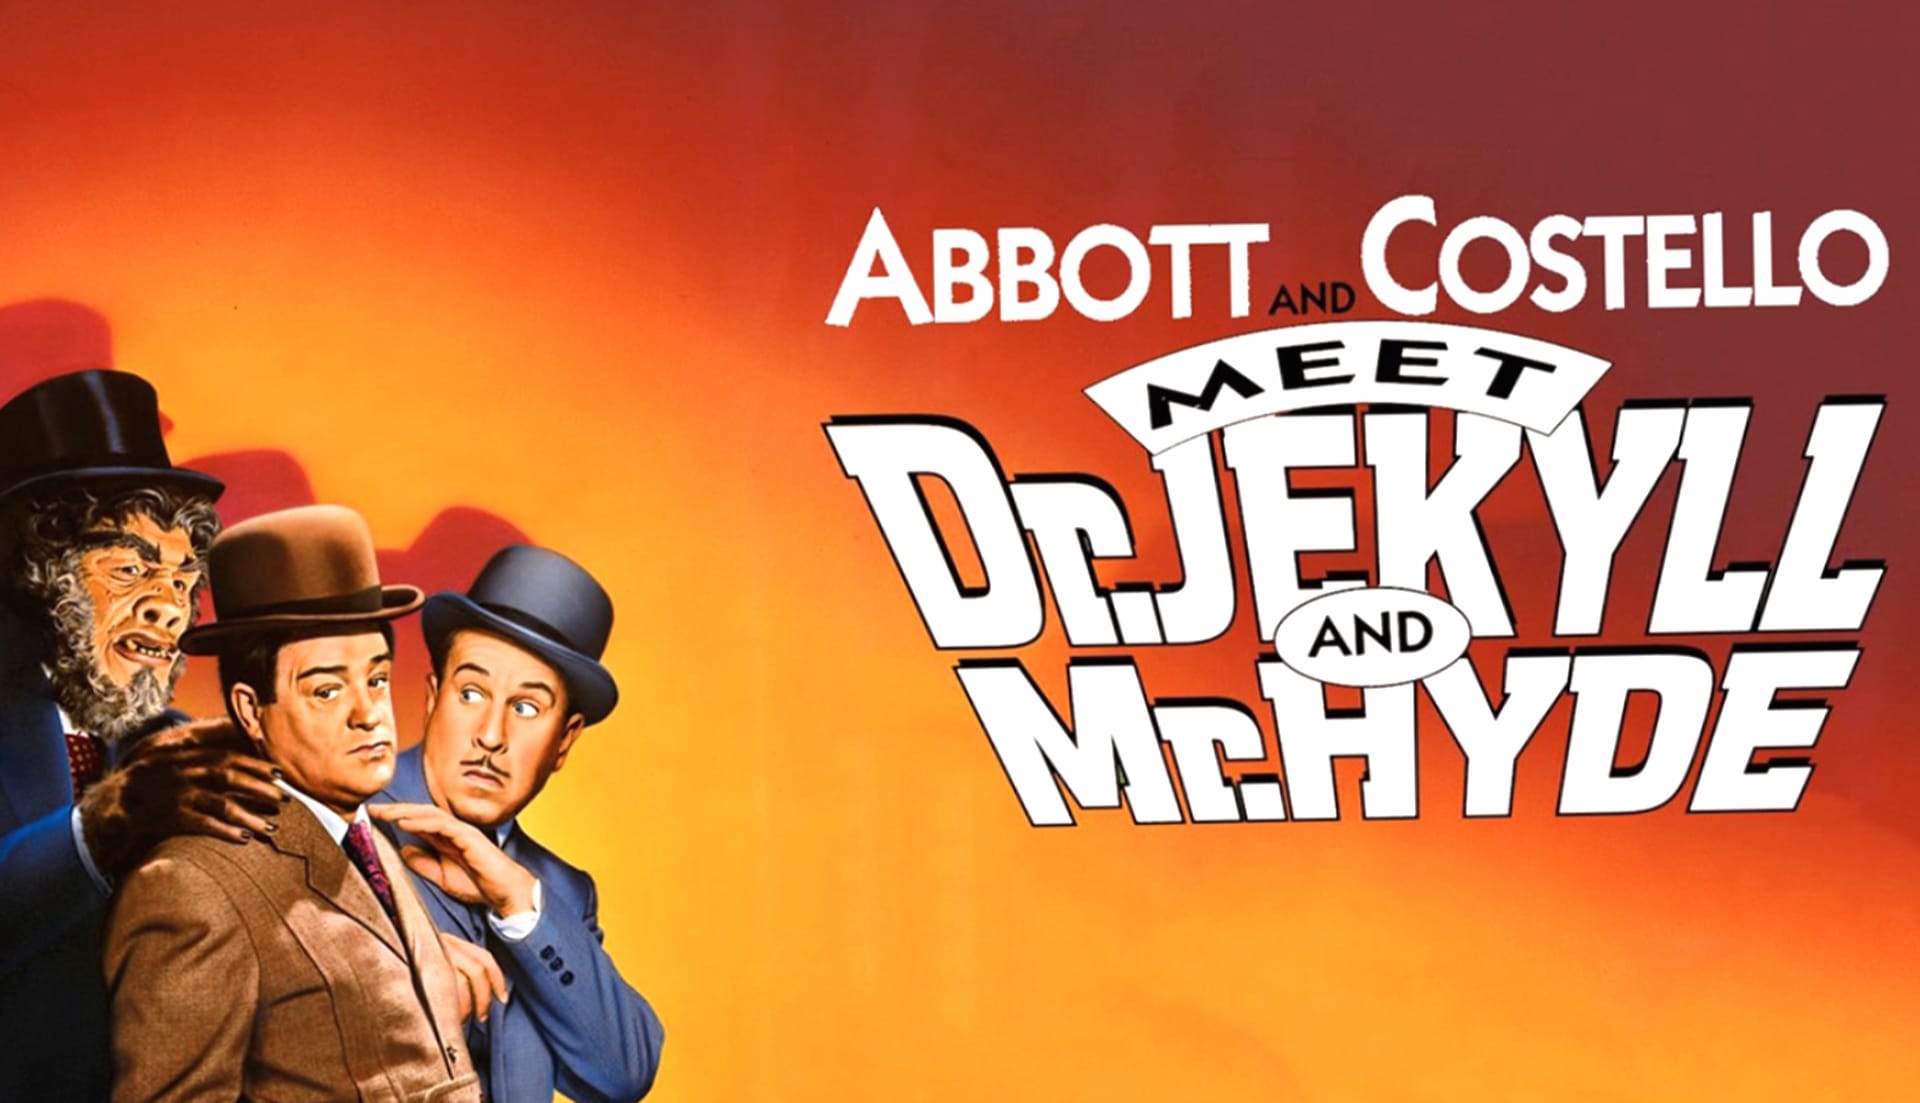 Abbott and Costello Meet Dr. Jekyll and Mr. Hyde wallpapers HD quality